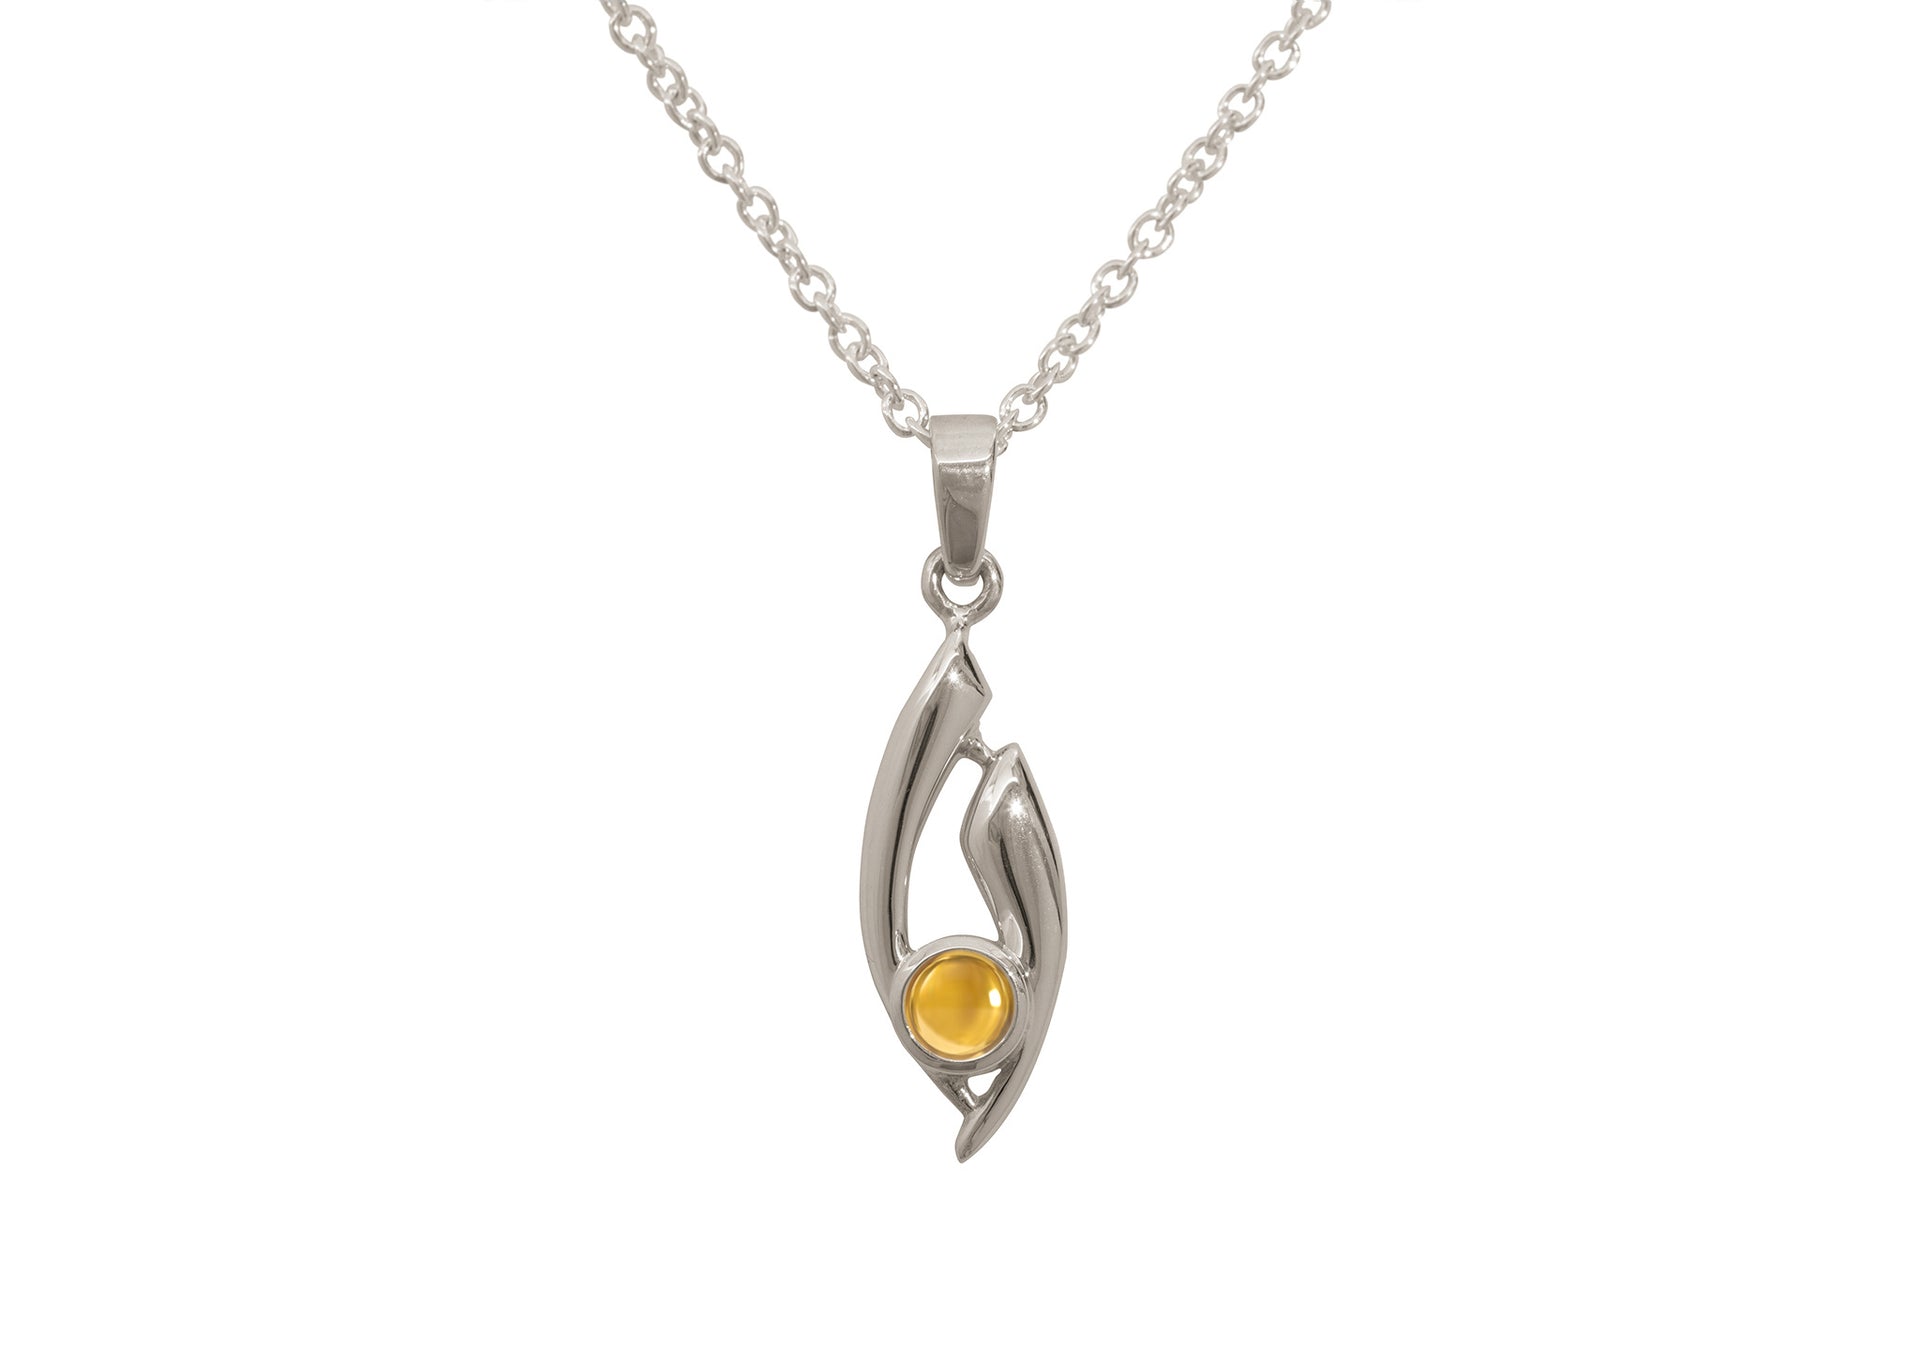 Flowing Cabochon Gemstone Pendant, Sterling Silver